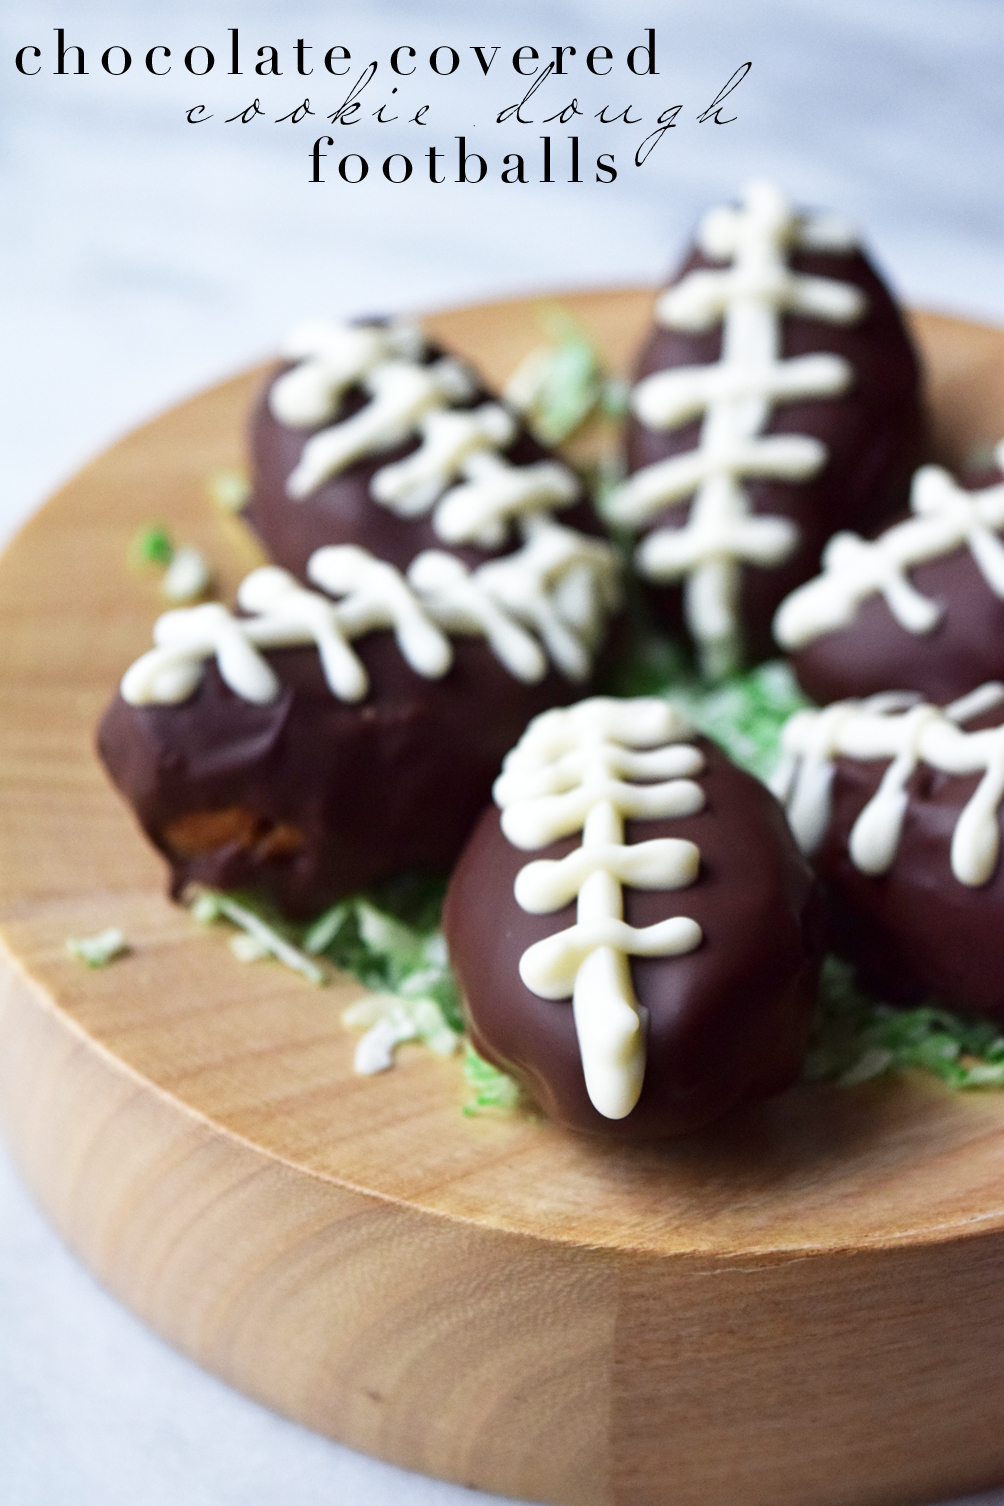 chocolate covered cookie dough footballs - Super Bowl food ideas